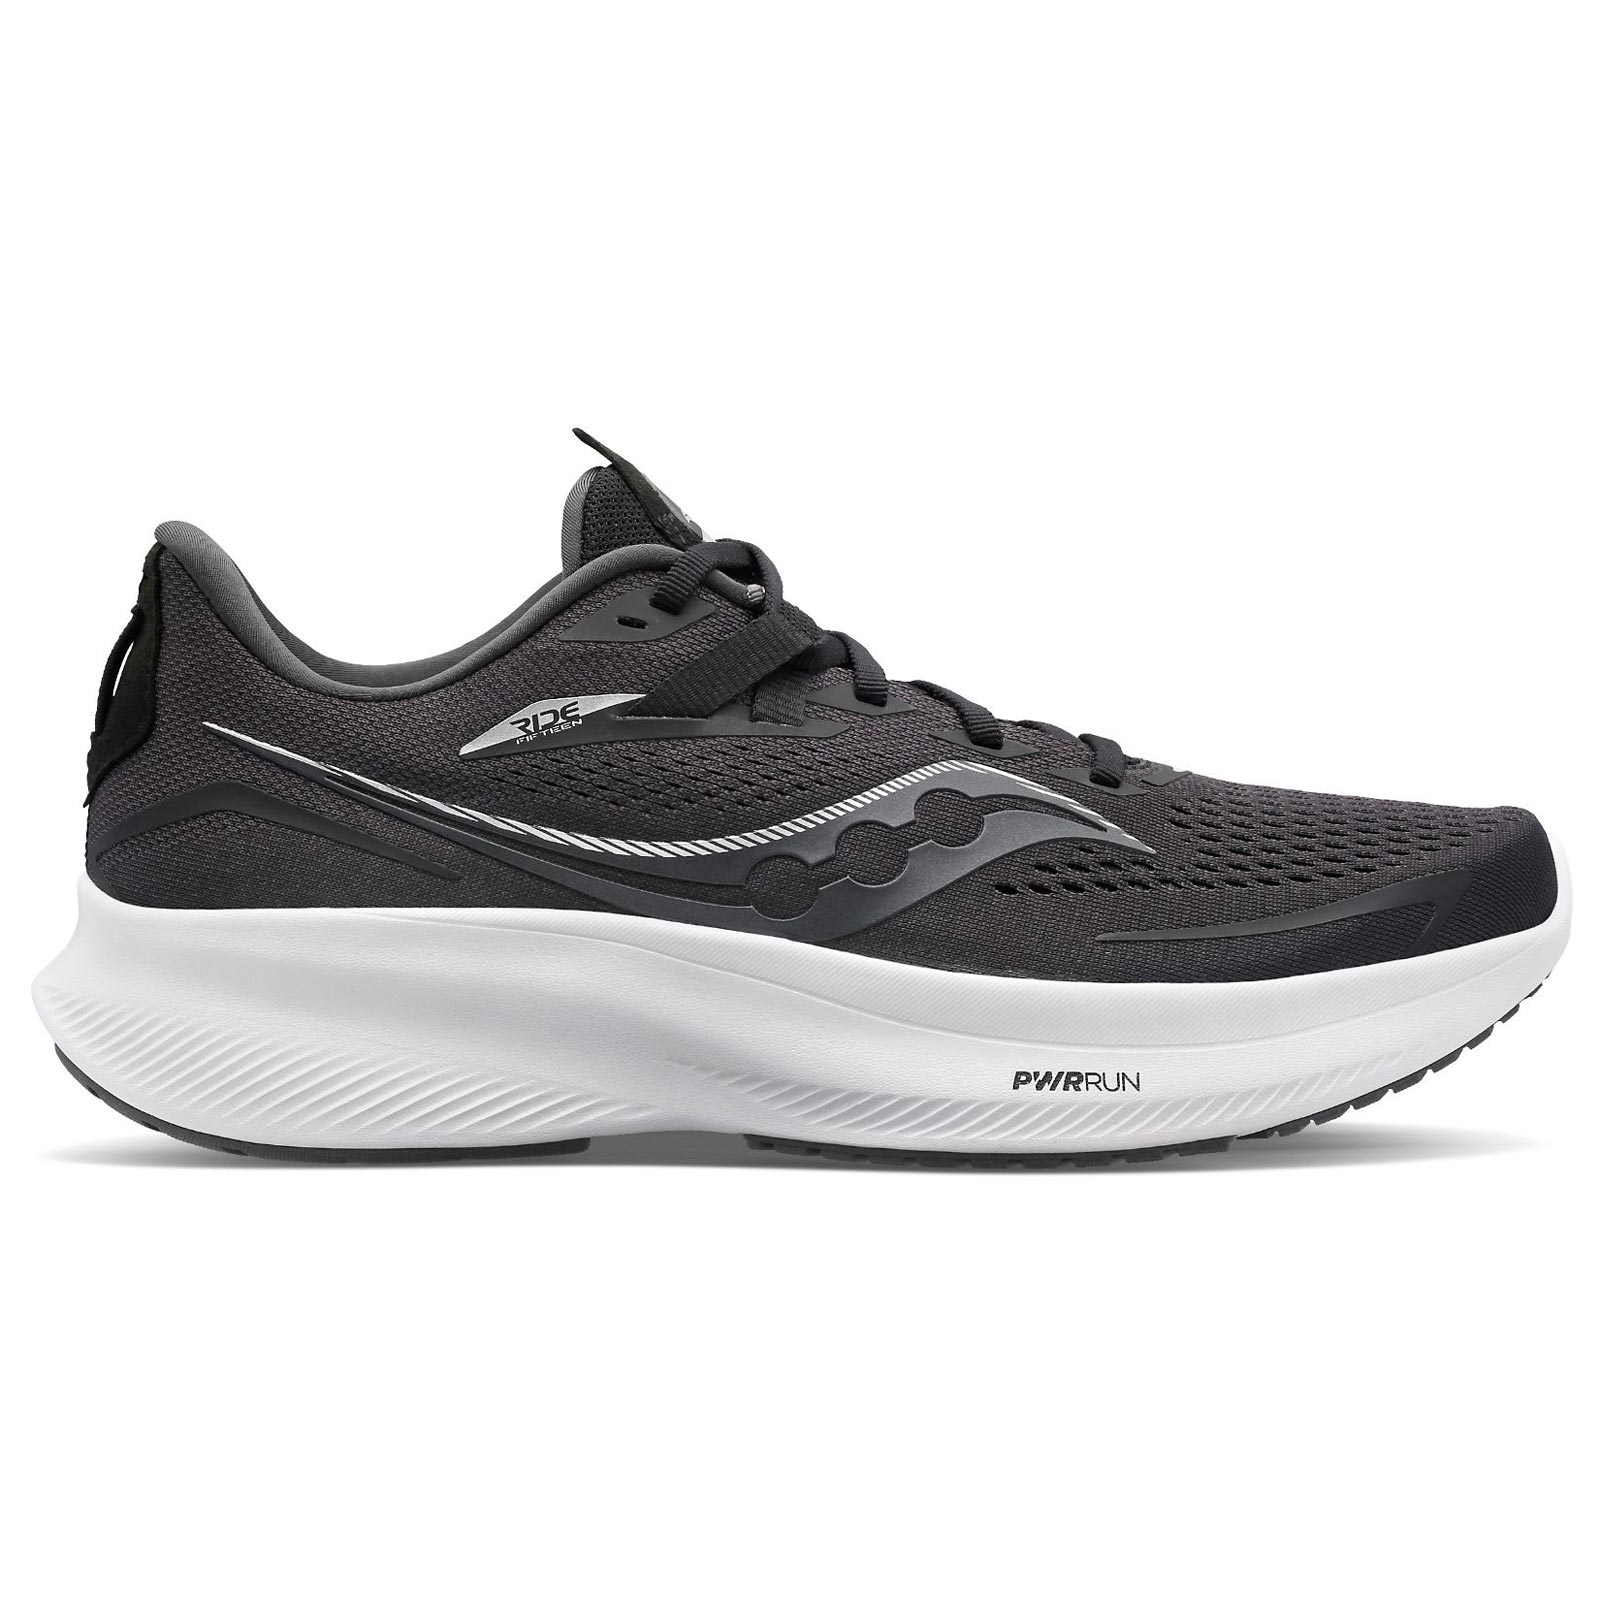 SAUCONY RIDE 15 MENS RUNNING SHOES